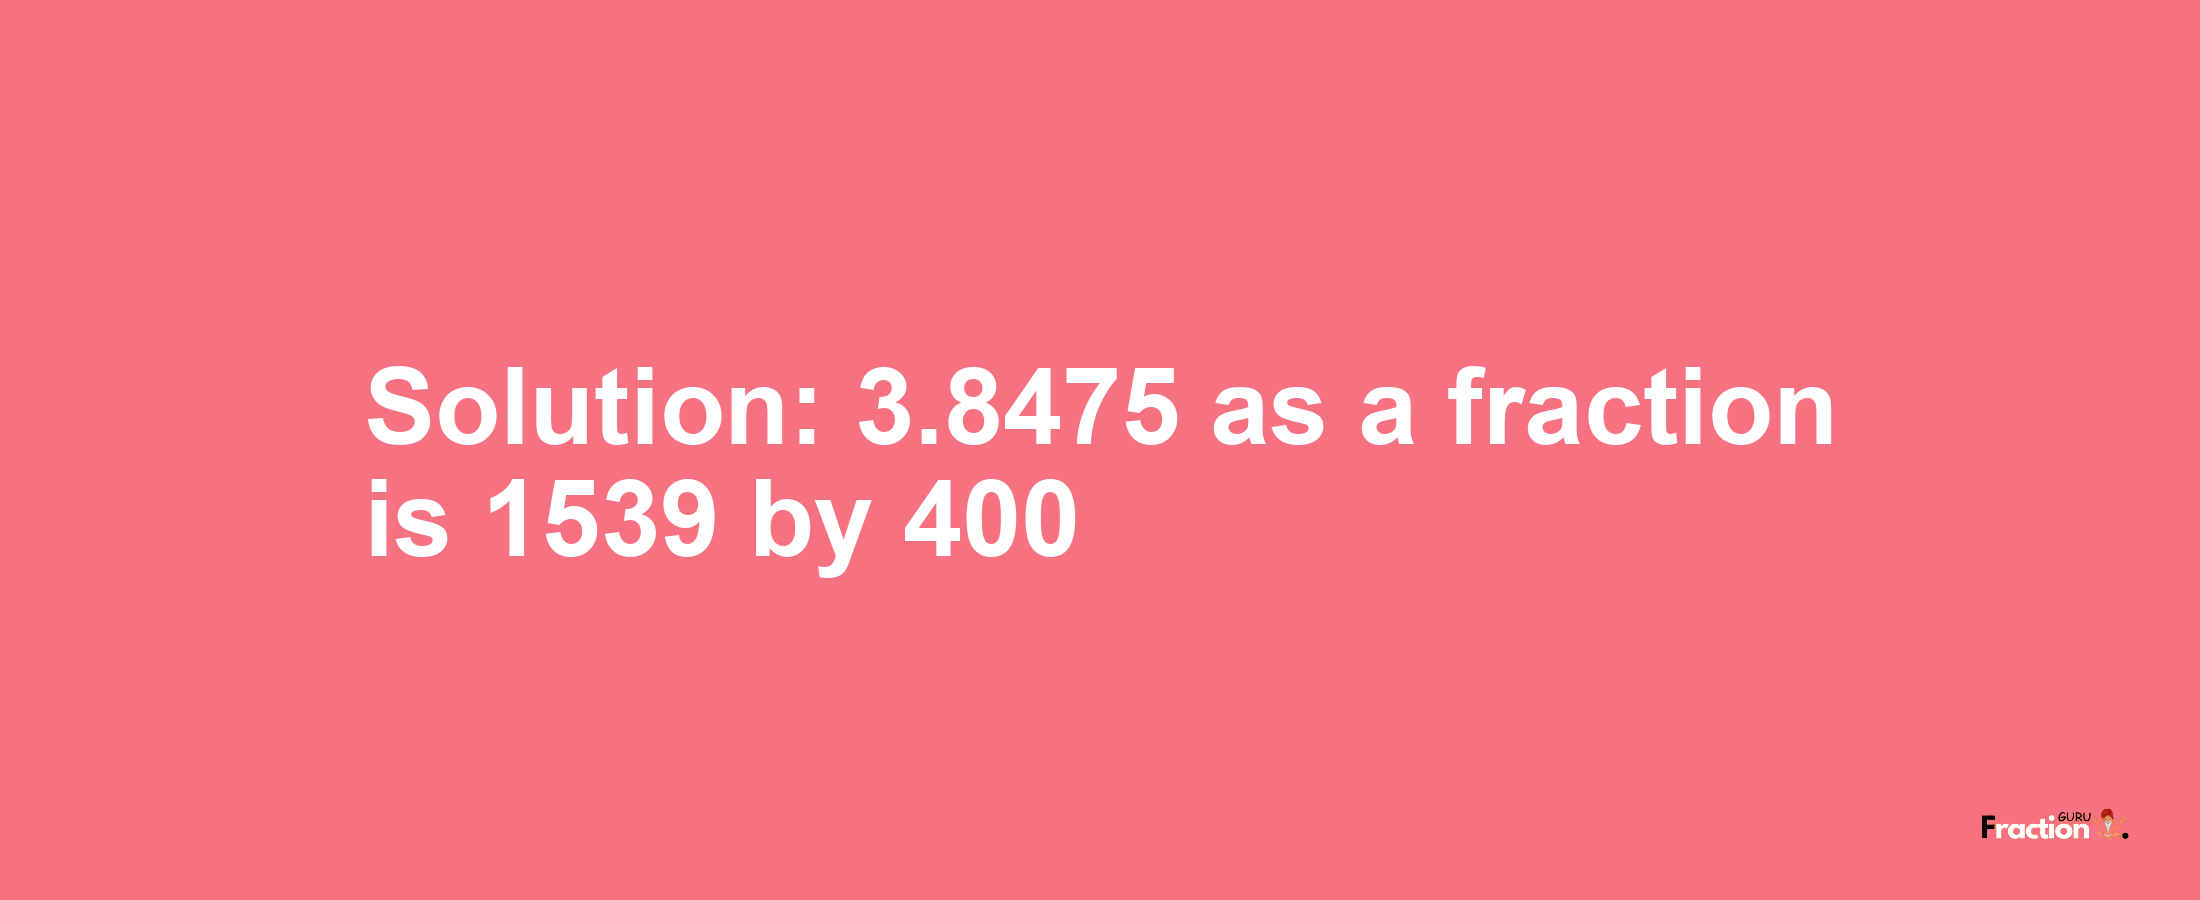 Solution:3.8475 as a fraction is 1539/400